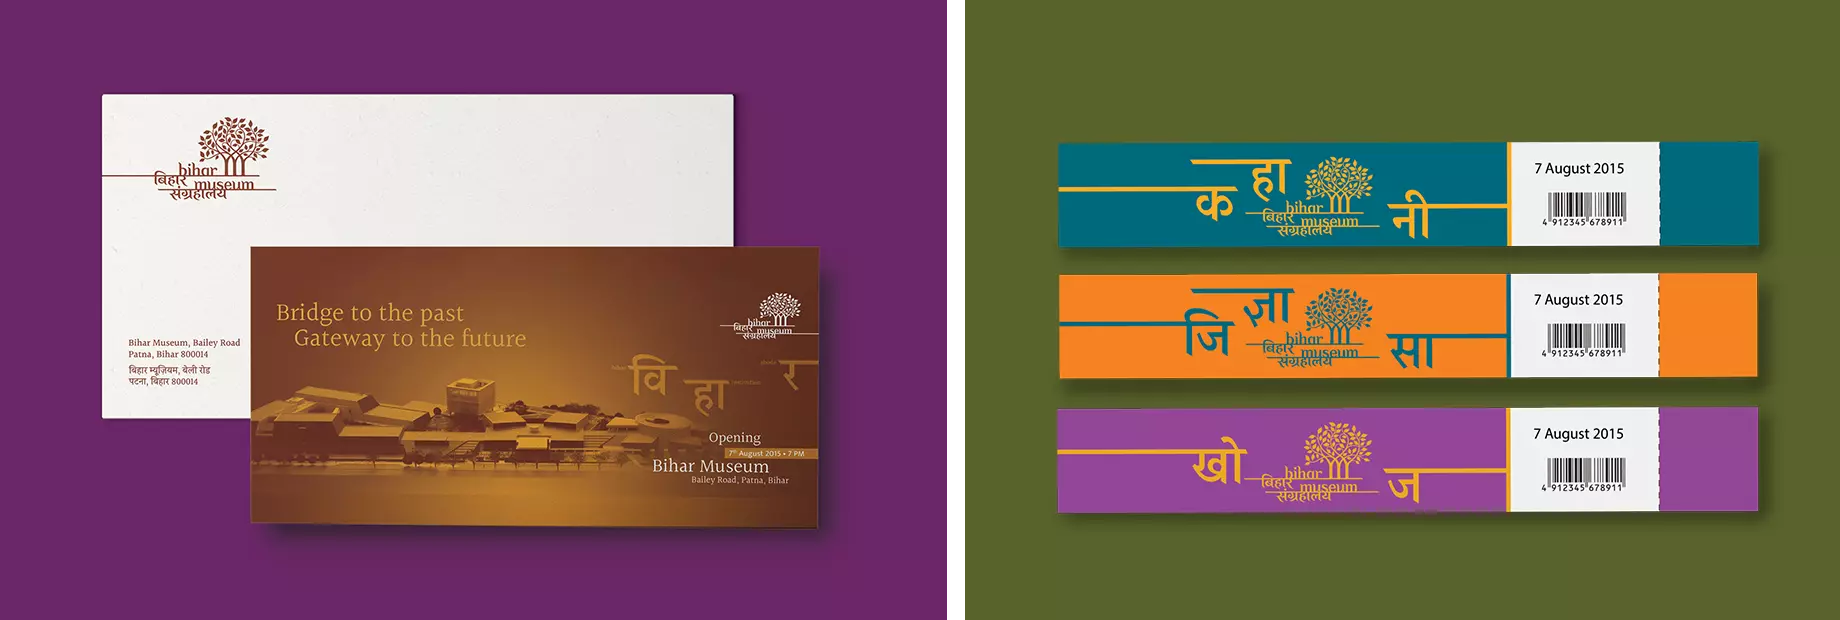 Branding and merchandise design for Bihar Museum on printed postcards and tickets